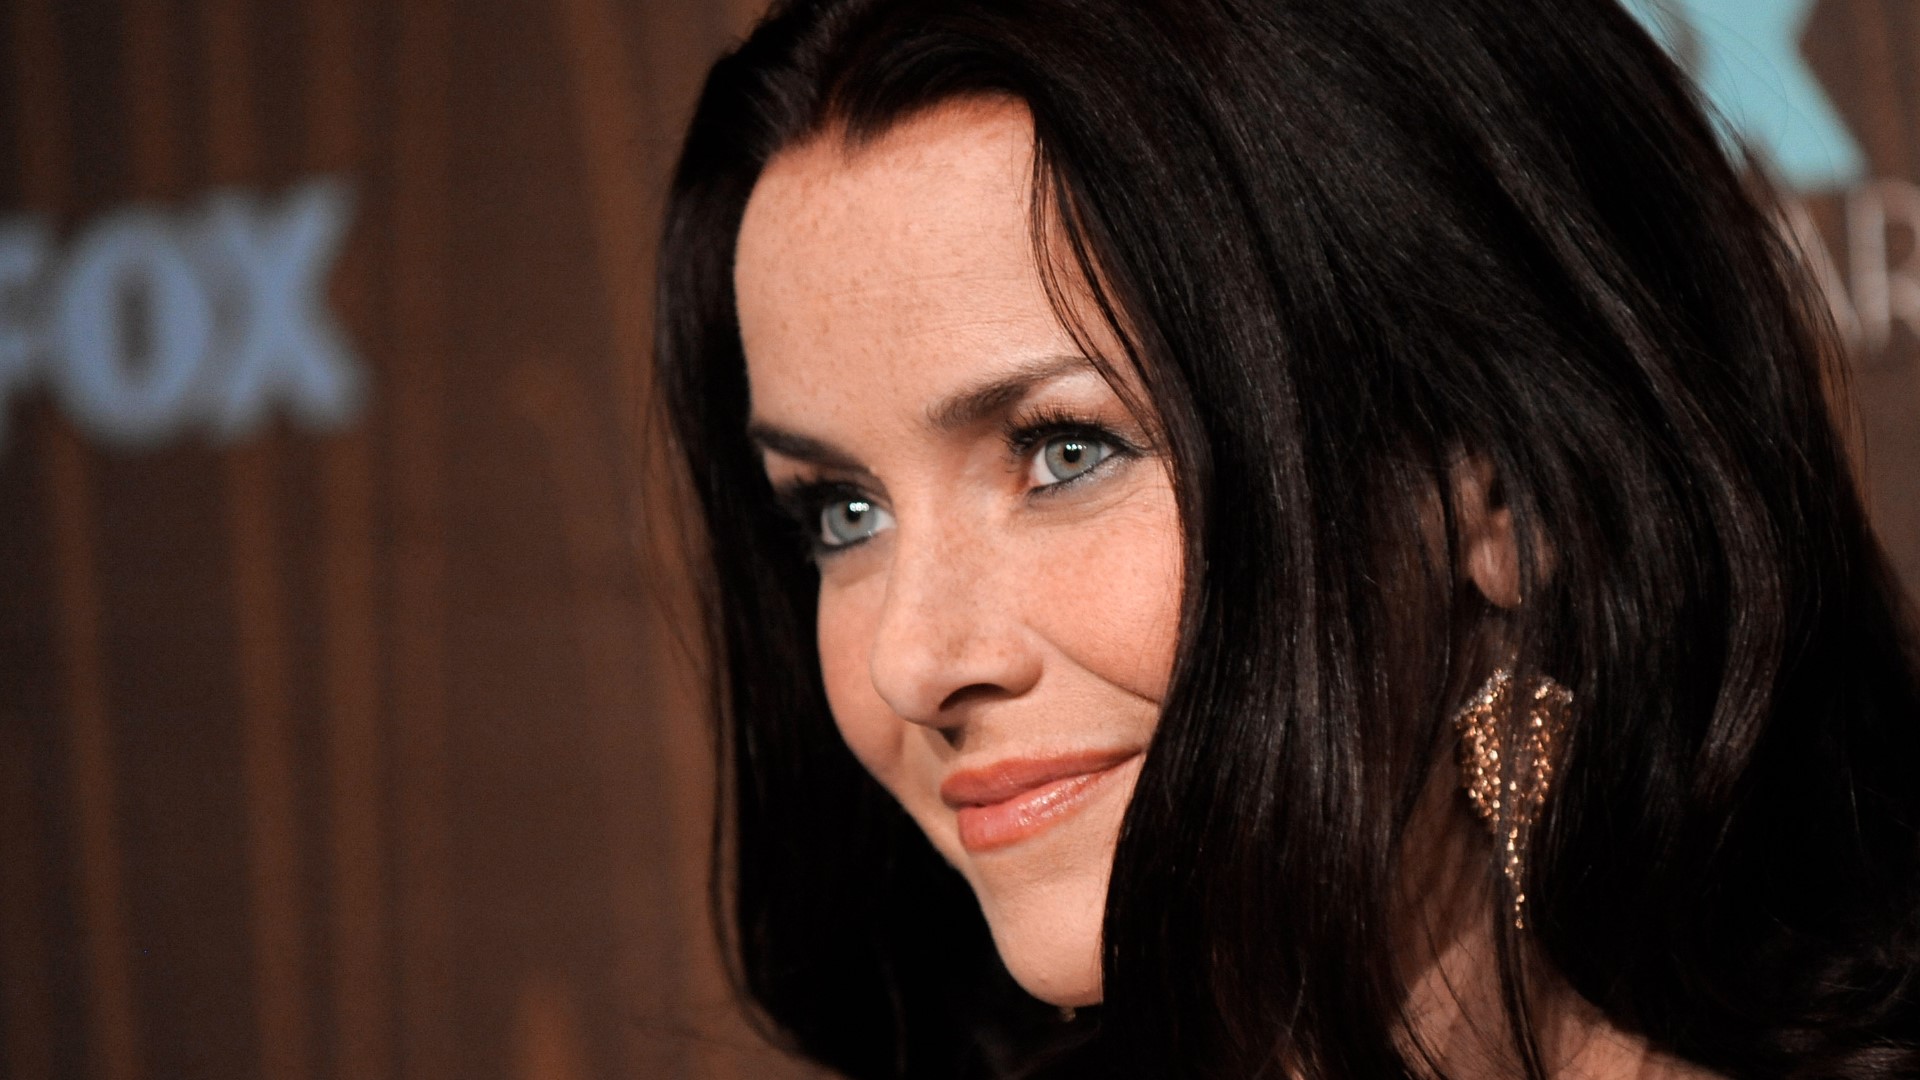 Wersching passed away Sunday morning in Los Angeles following a battle with cancer, her publicist told The Associated Press. The type of cancer was not specified.